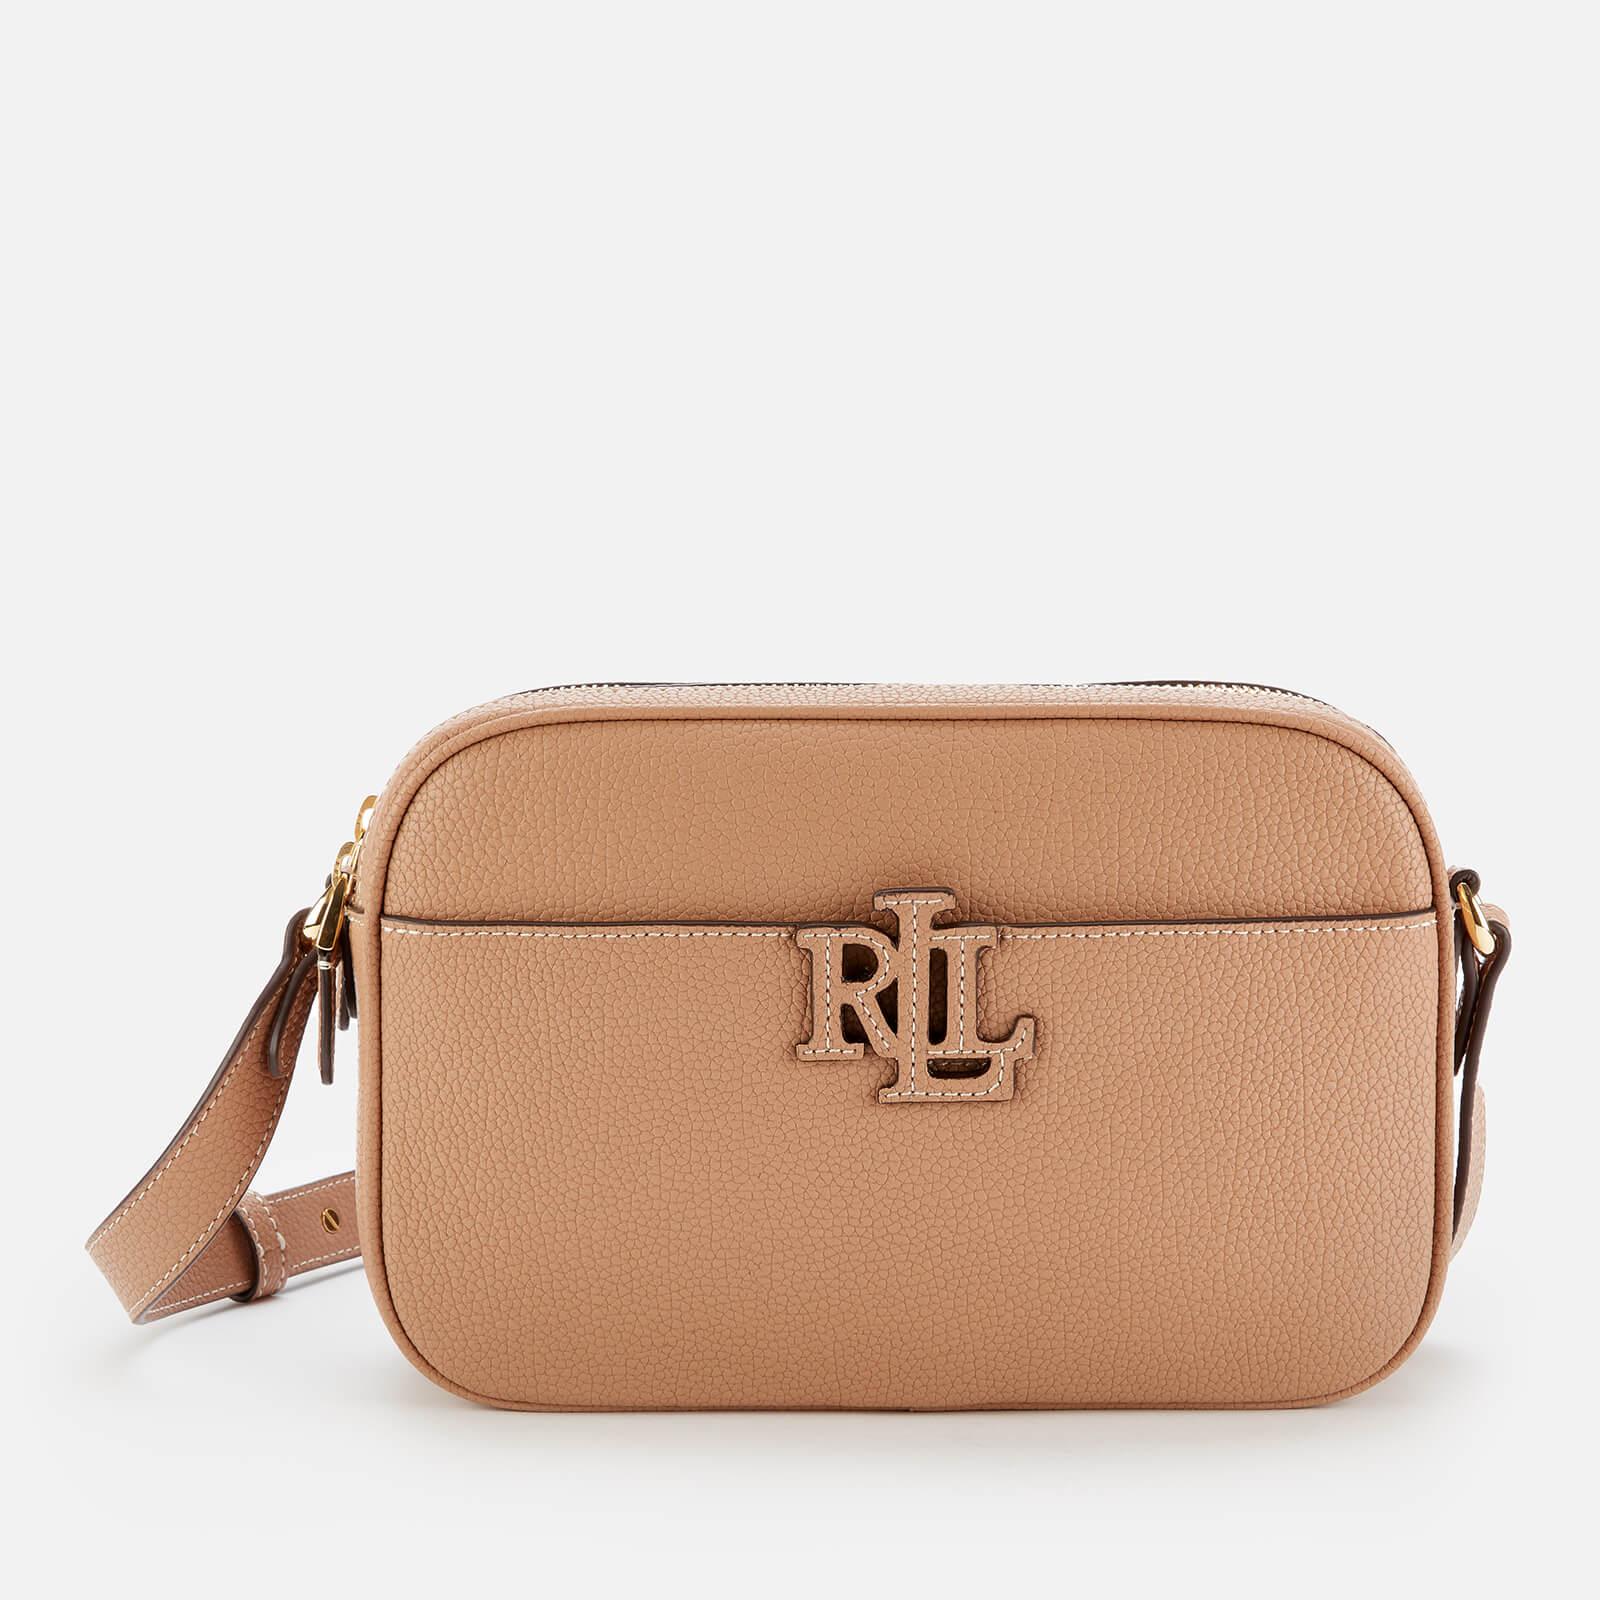 Lauren by Ralph Lauren Stacked Leather Carrie Cross Body Bag in Natural |  Lyst